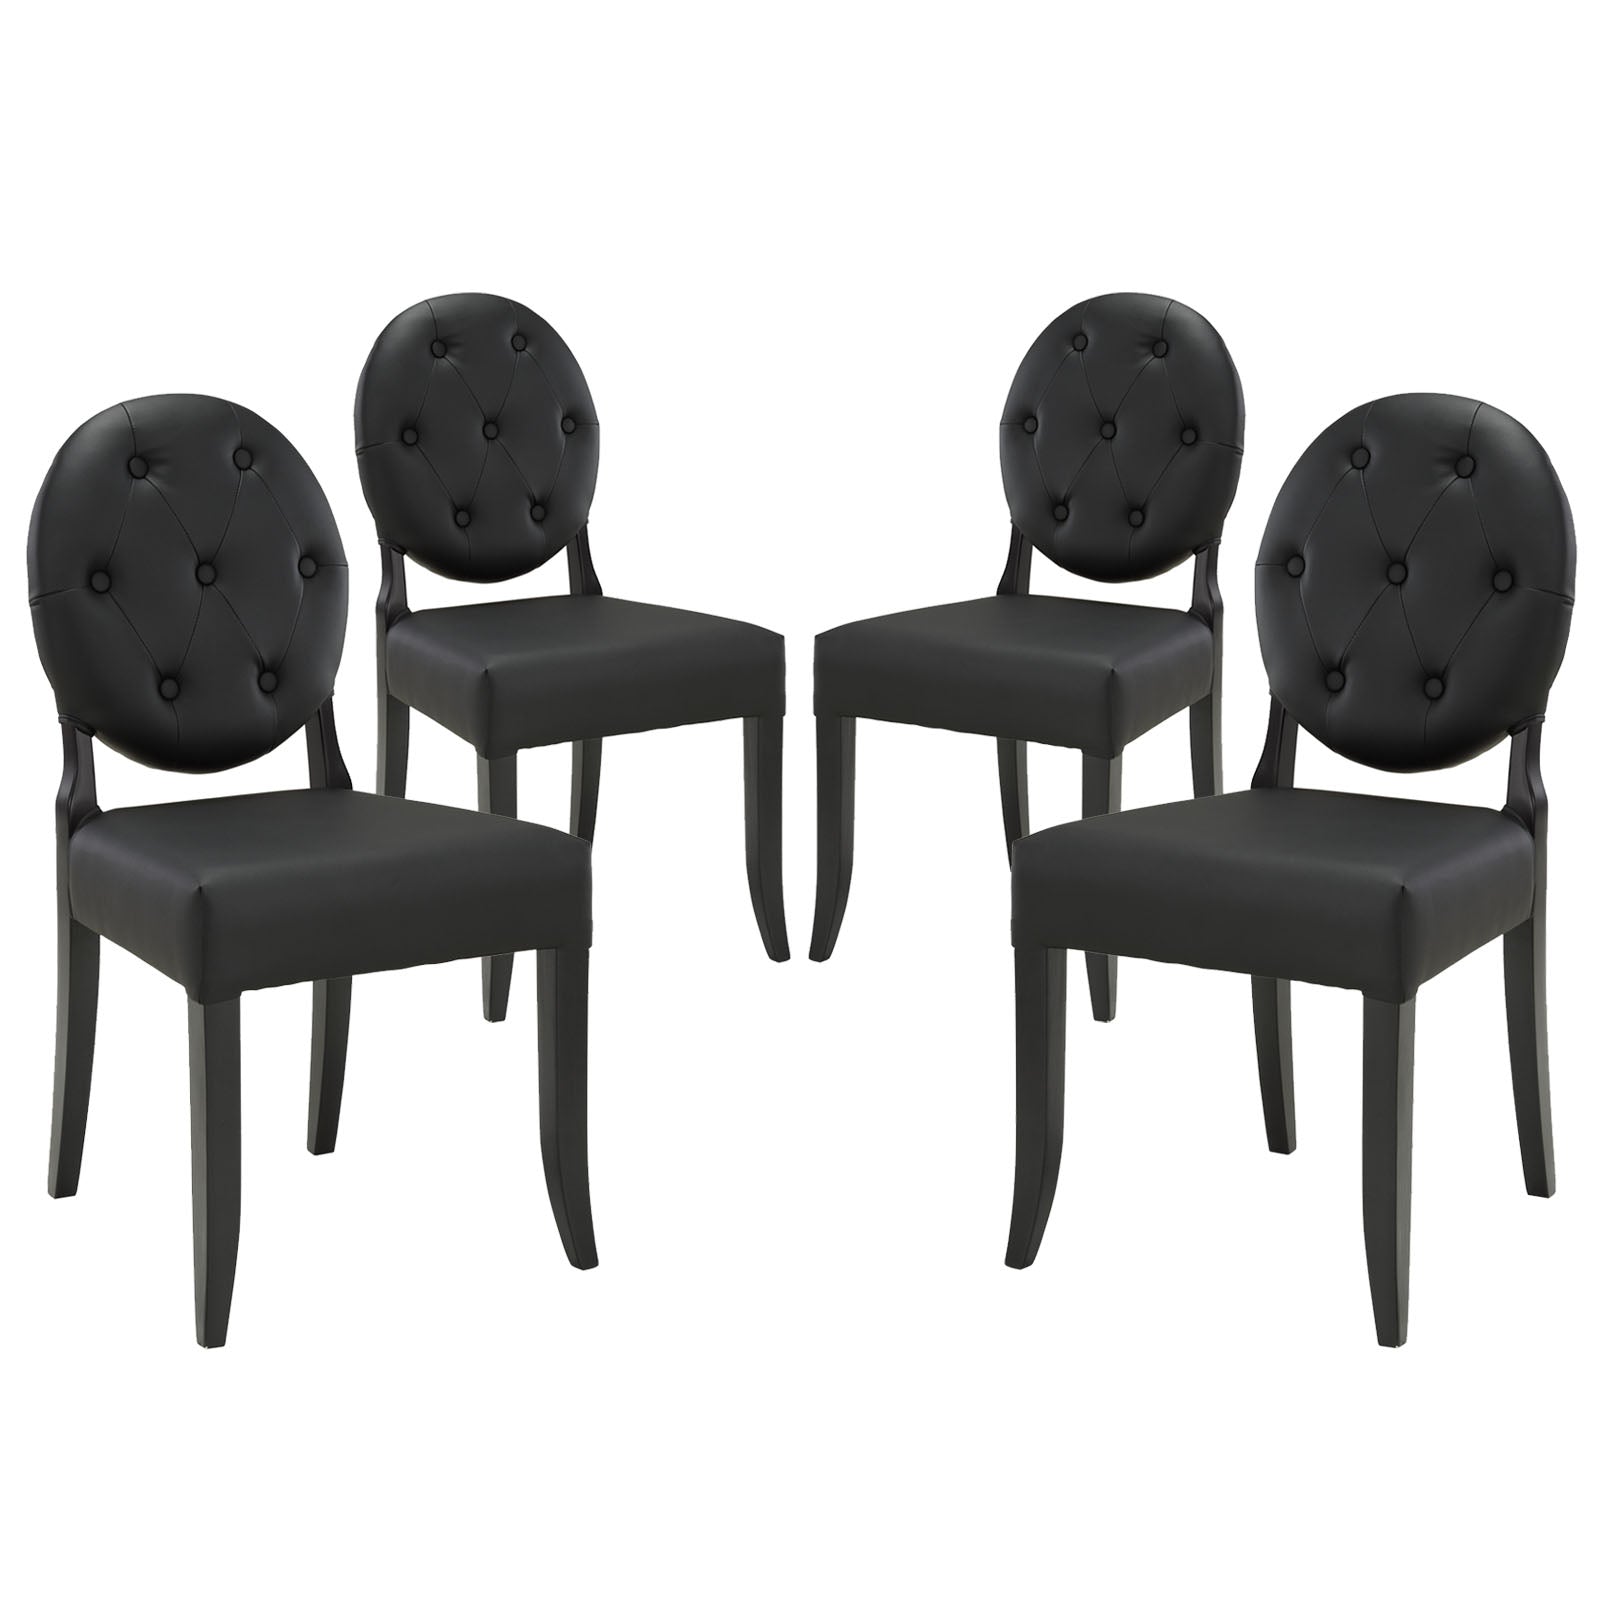 Button Dining Side Chair Set of 4 - East Shore Modern Home Furnishings